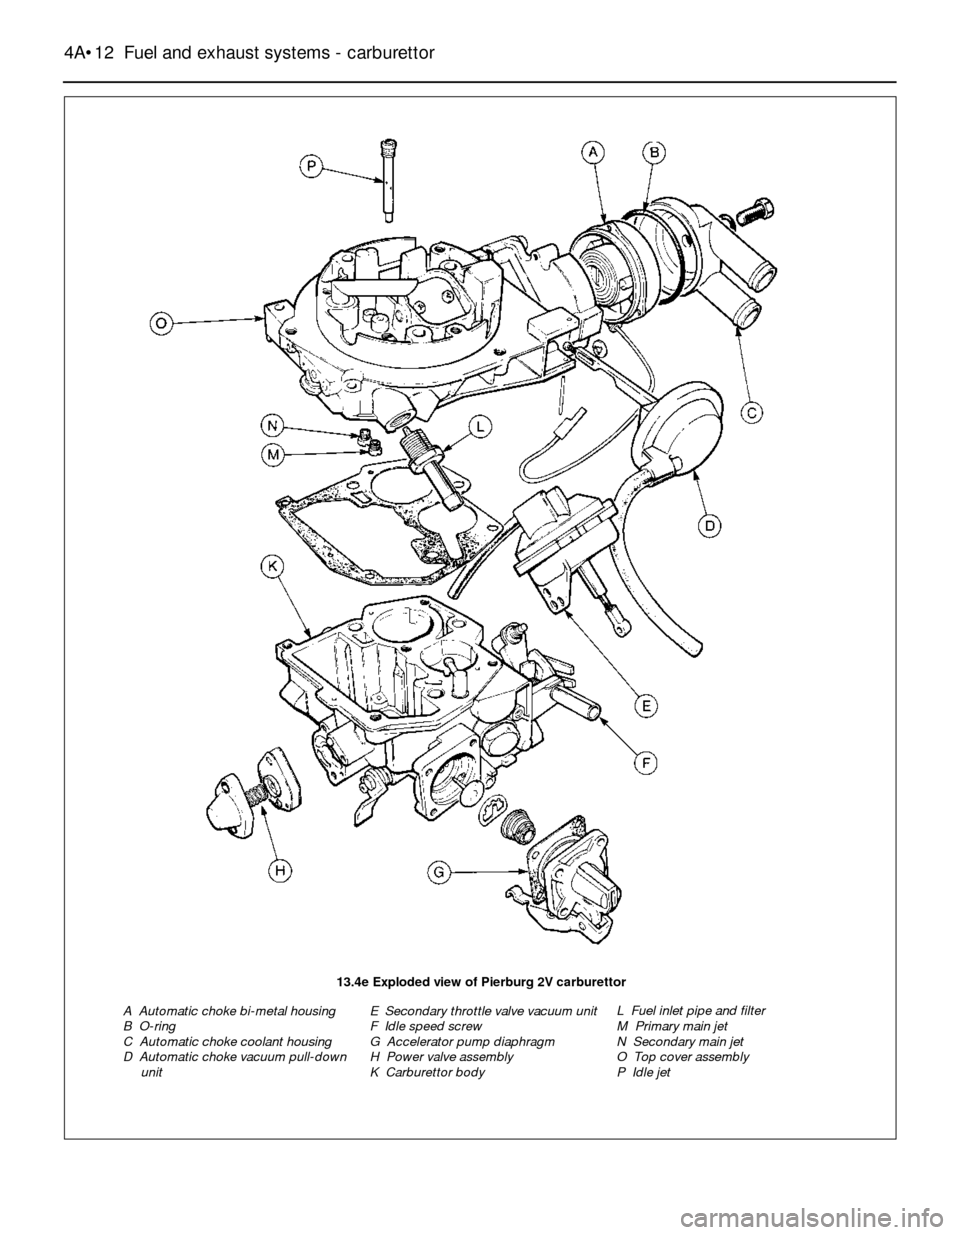 FORD SIERRA 1989 2.G Fuel And Exhaust Systems Carburettor User Guide 4A•12Fuel and exhaust systems - carburettor
13.4e Exploded view of Pierburg 2V carburettor
A  Automatic choke bi-metal housing
B  O-ring
C  Automatic choke coolant housing
D  Automatic choke vacuum 